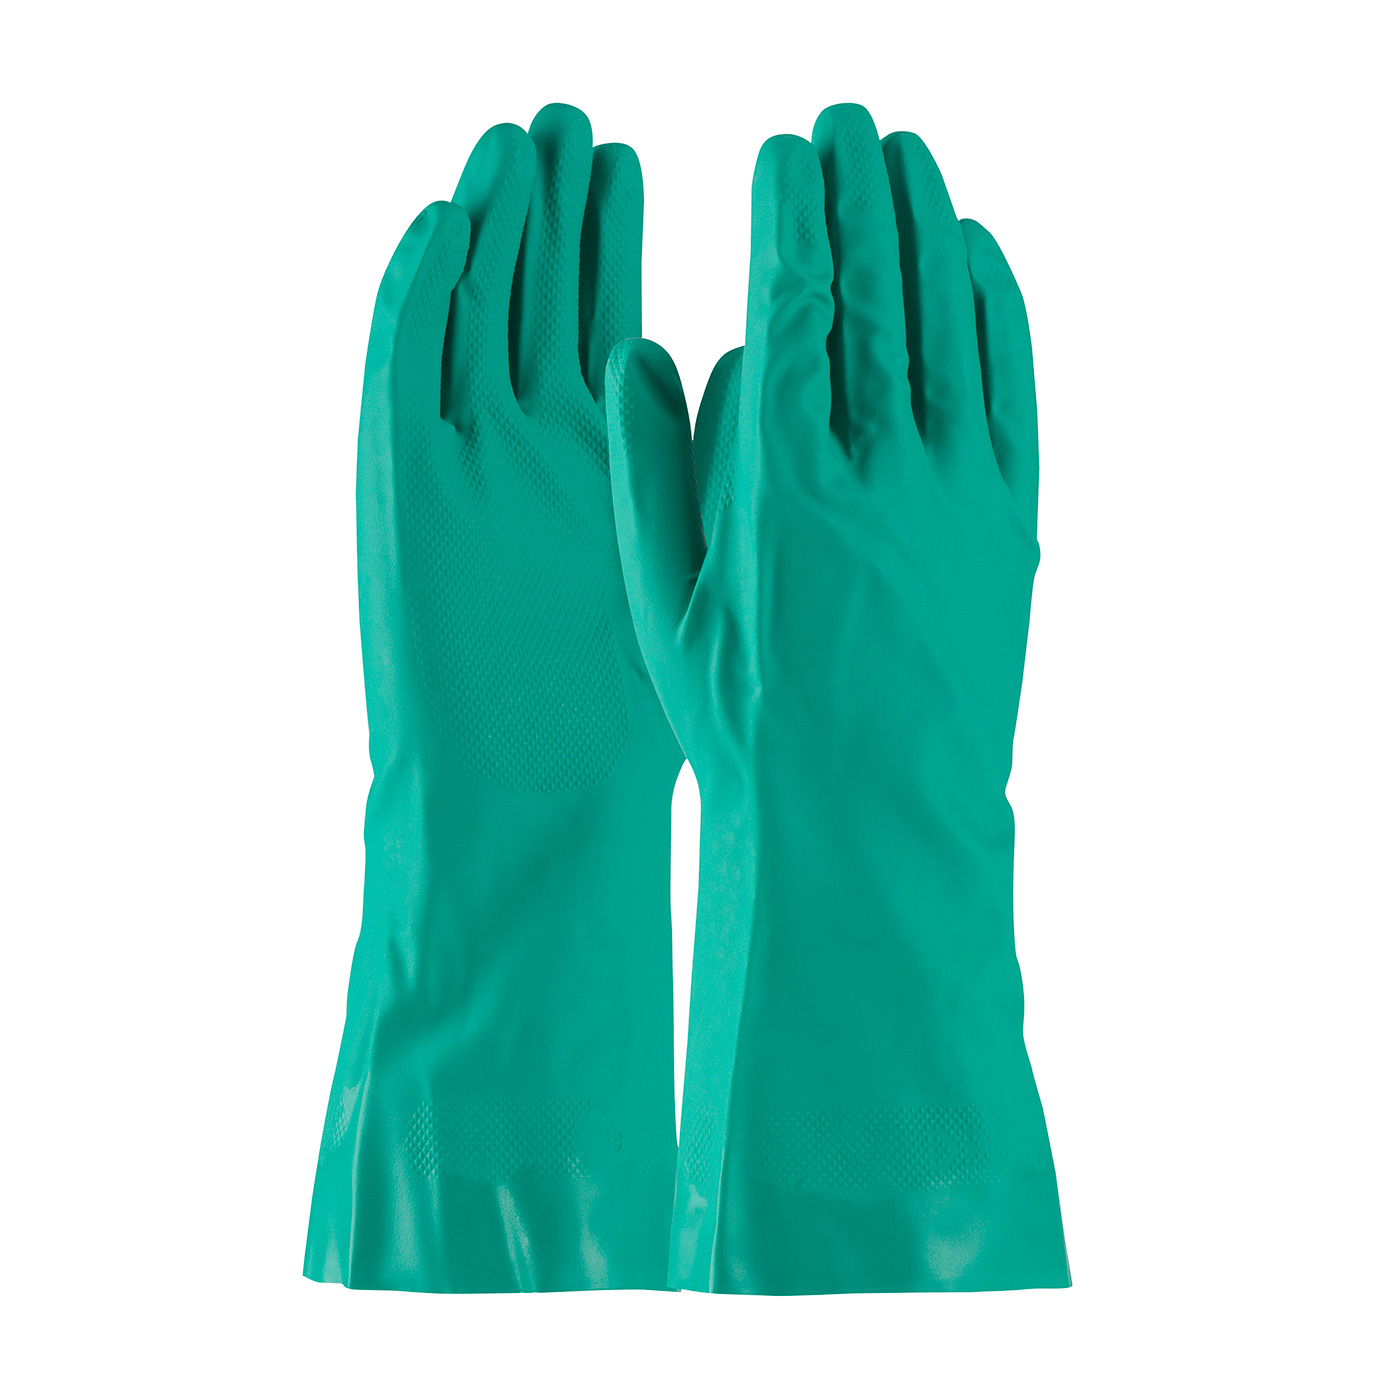 PIP 50-N160G/L Assurance Unsupported Nitrile, Flock Lined with Raised Diamond Grip - 15 Mi - Large PID-50 N160G L